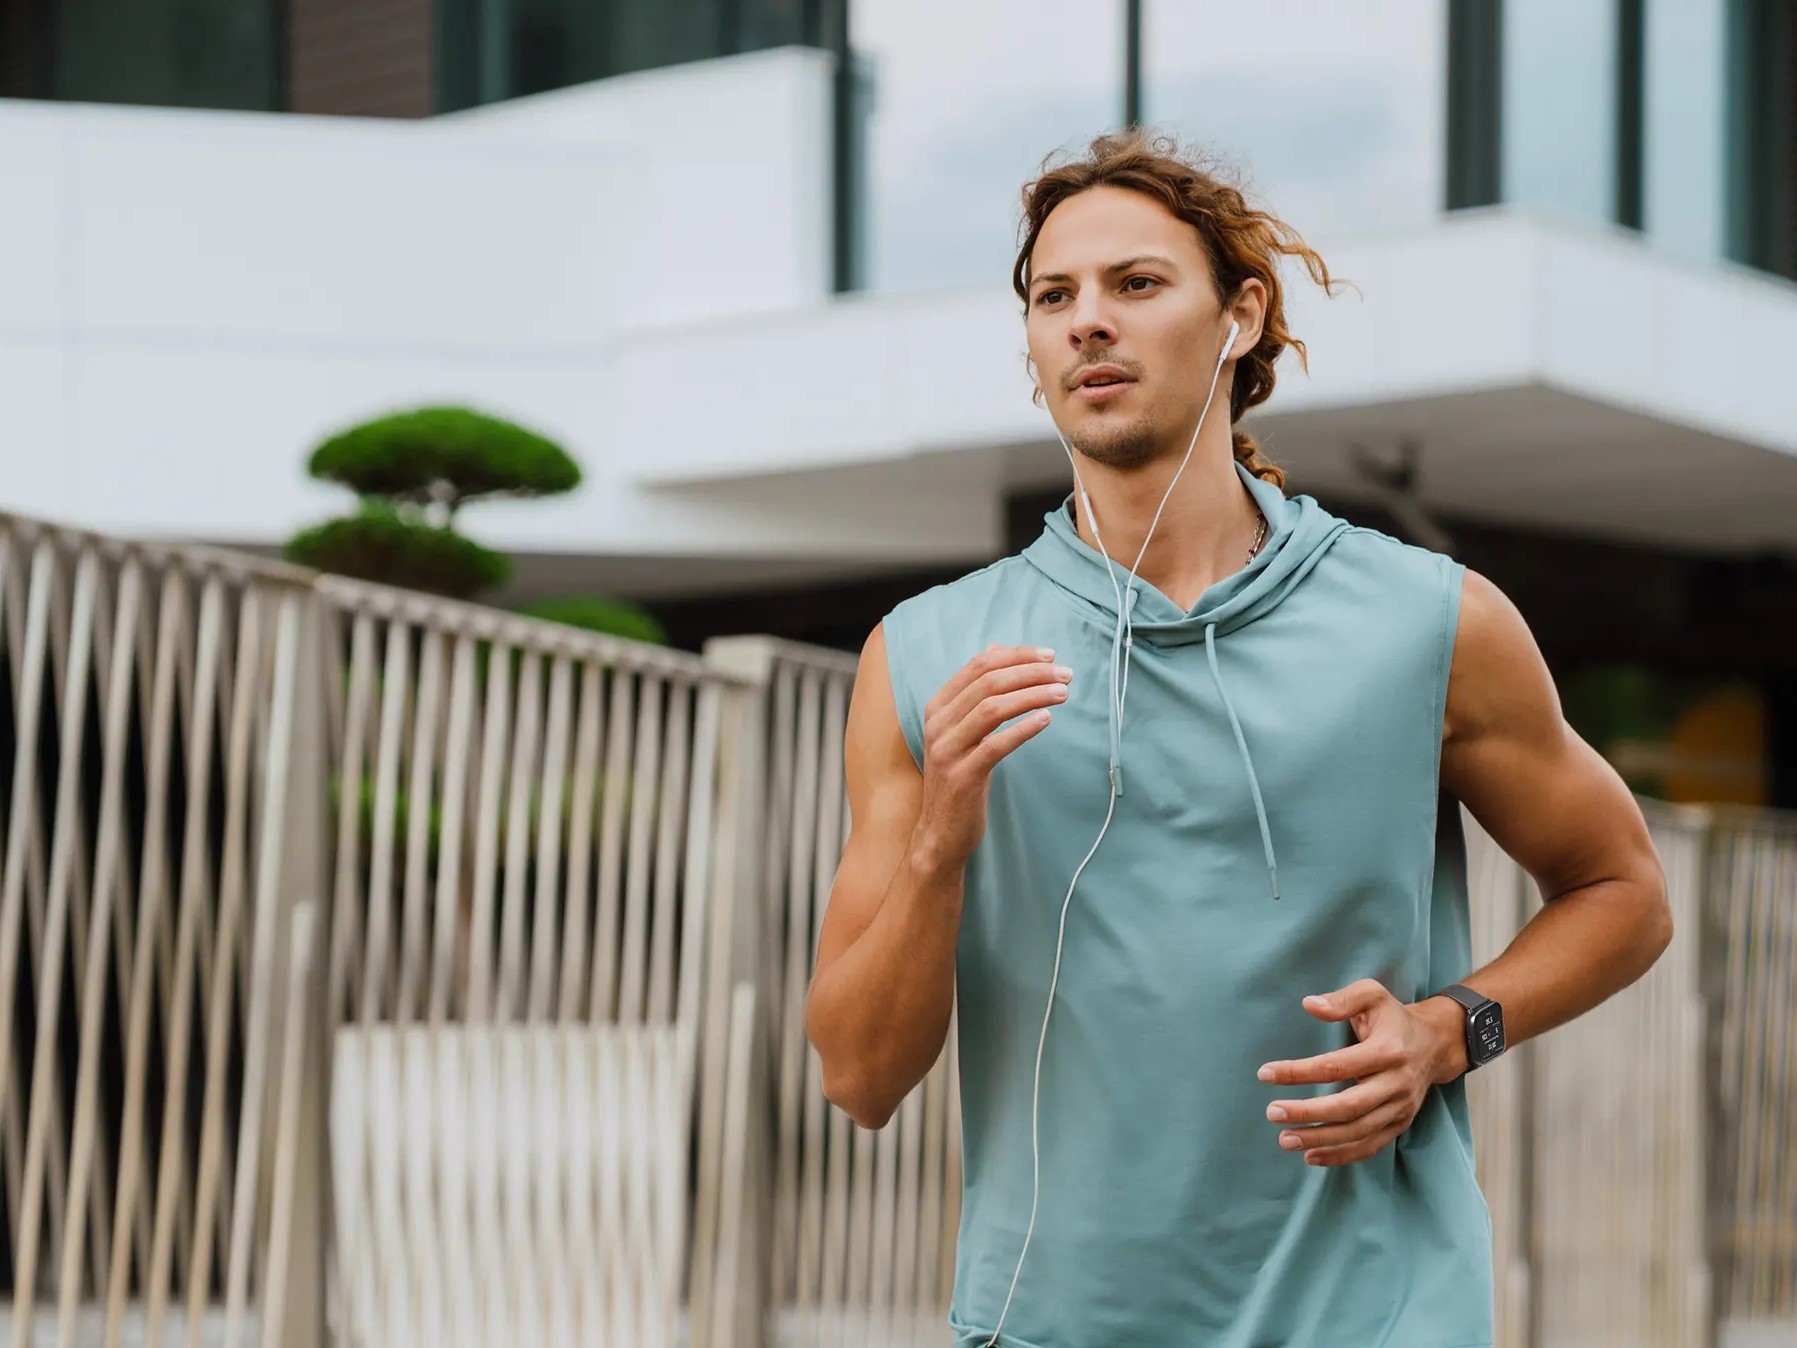 Amazfit releases update with new workout features for recent smartwatches